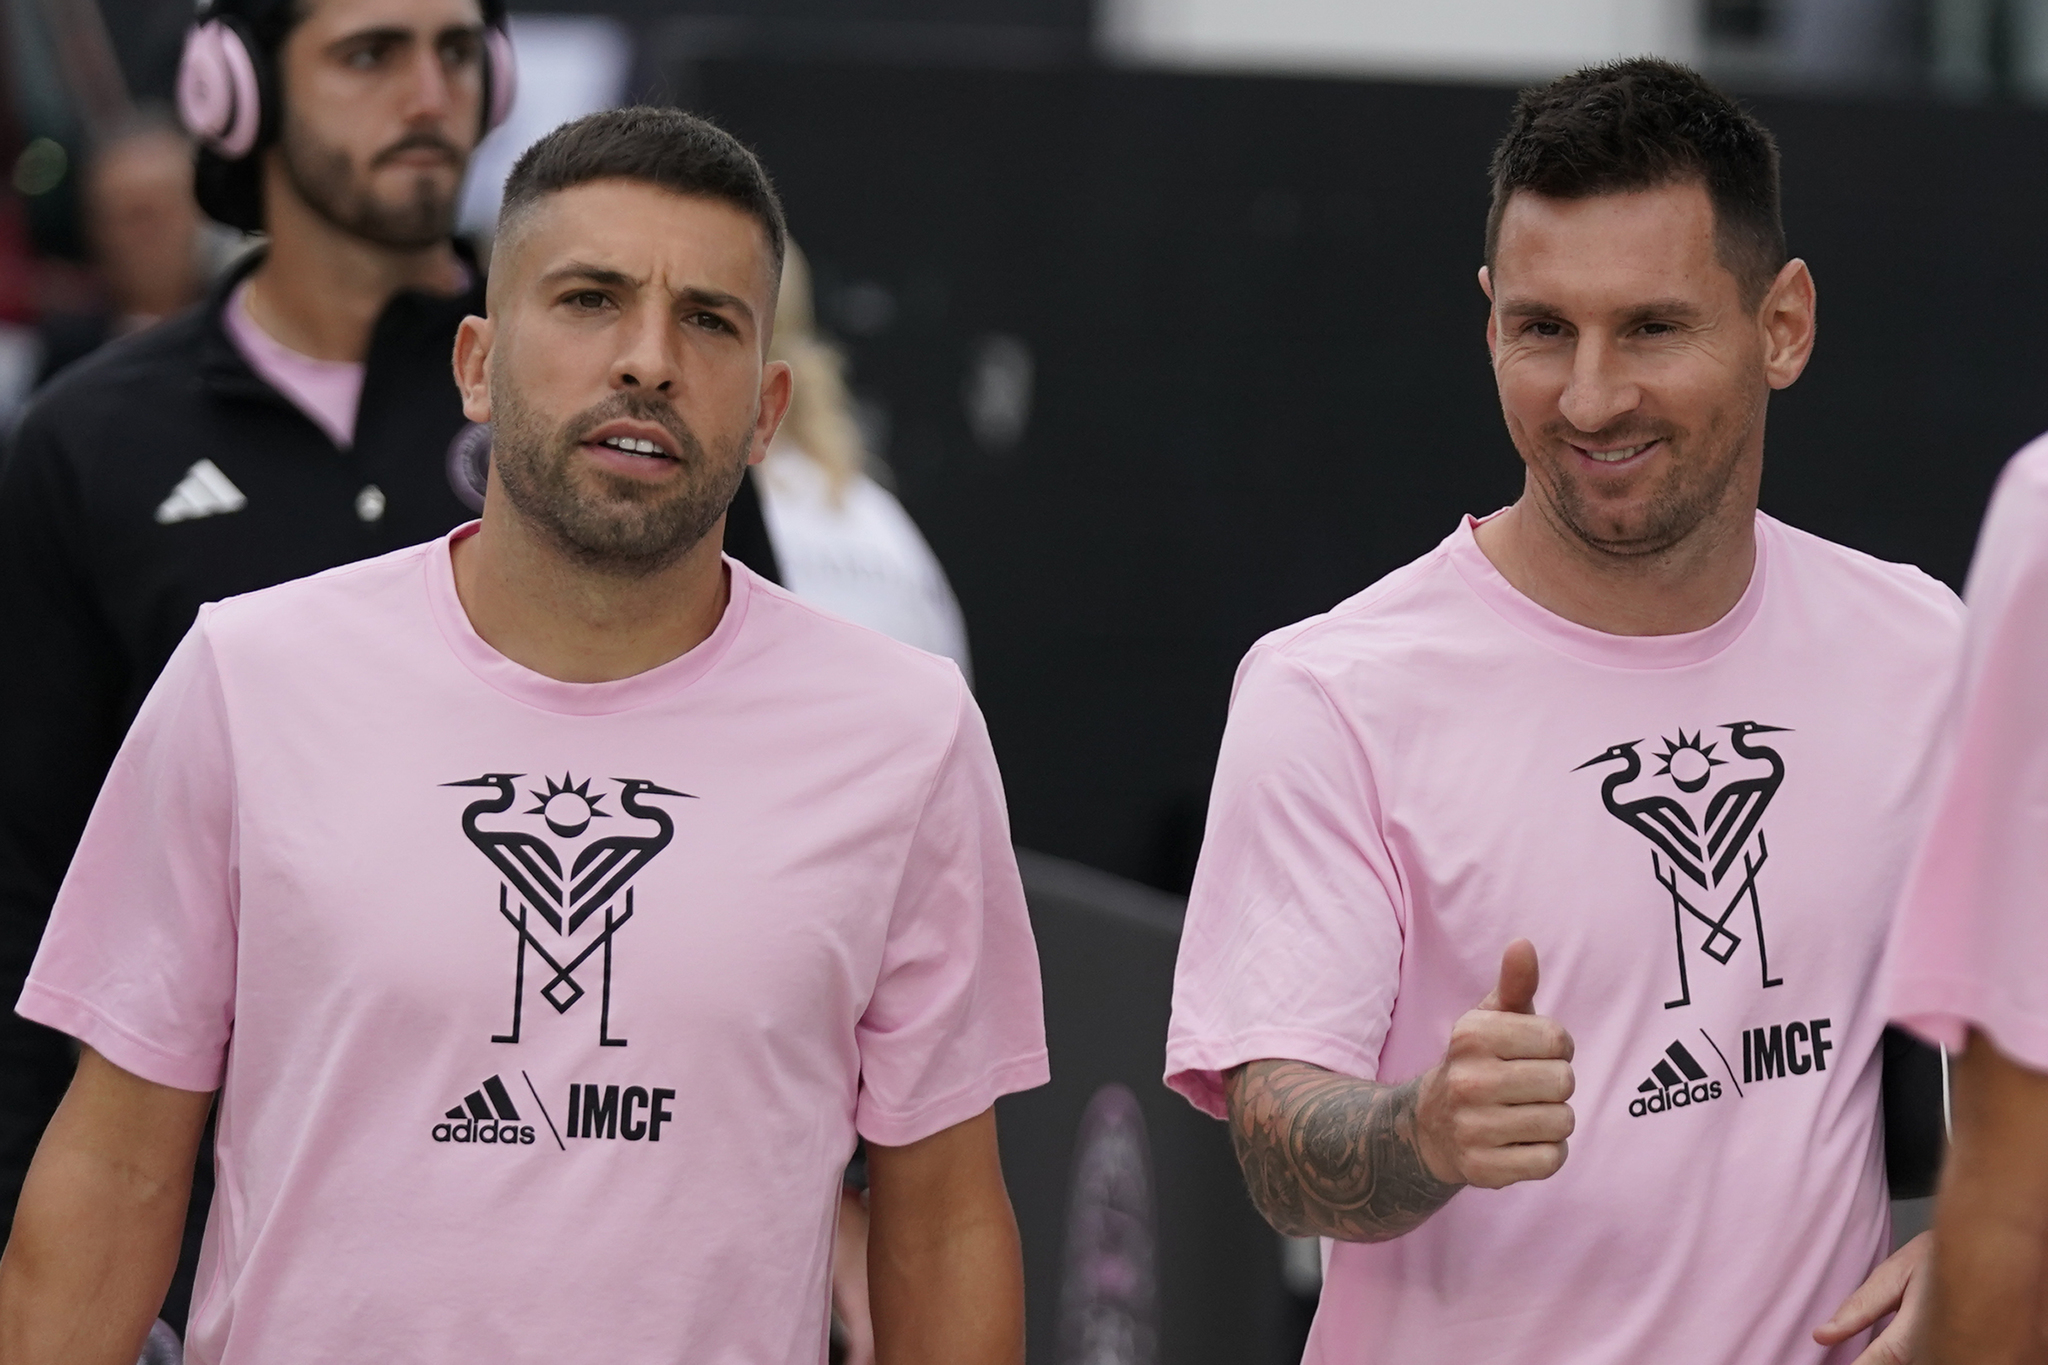 Jordi Alba and Leo Messi (right) suffered injuries in an MLS game last week. Tonight, Messi will watch the US Open Cup Final as a spectator.